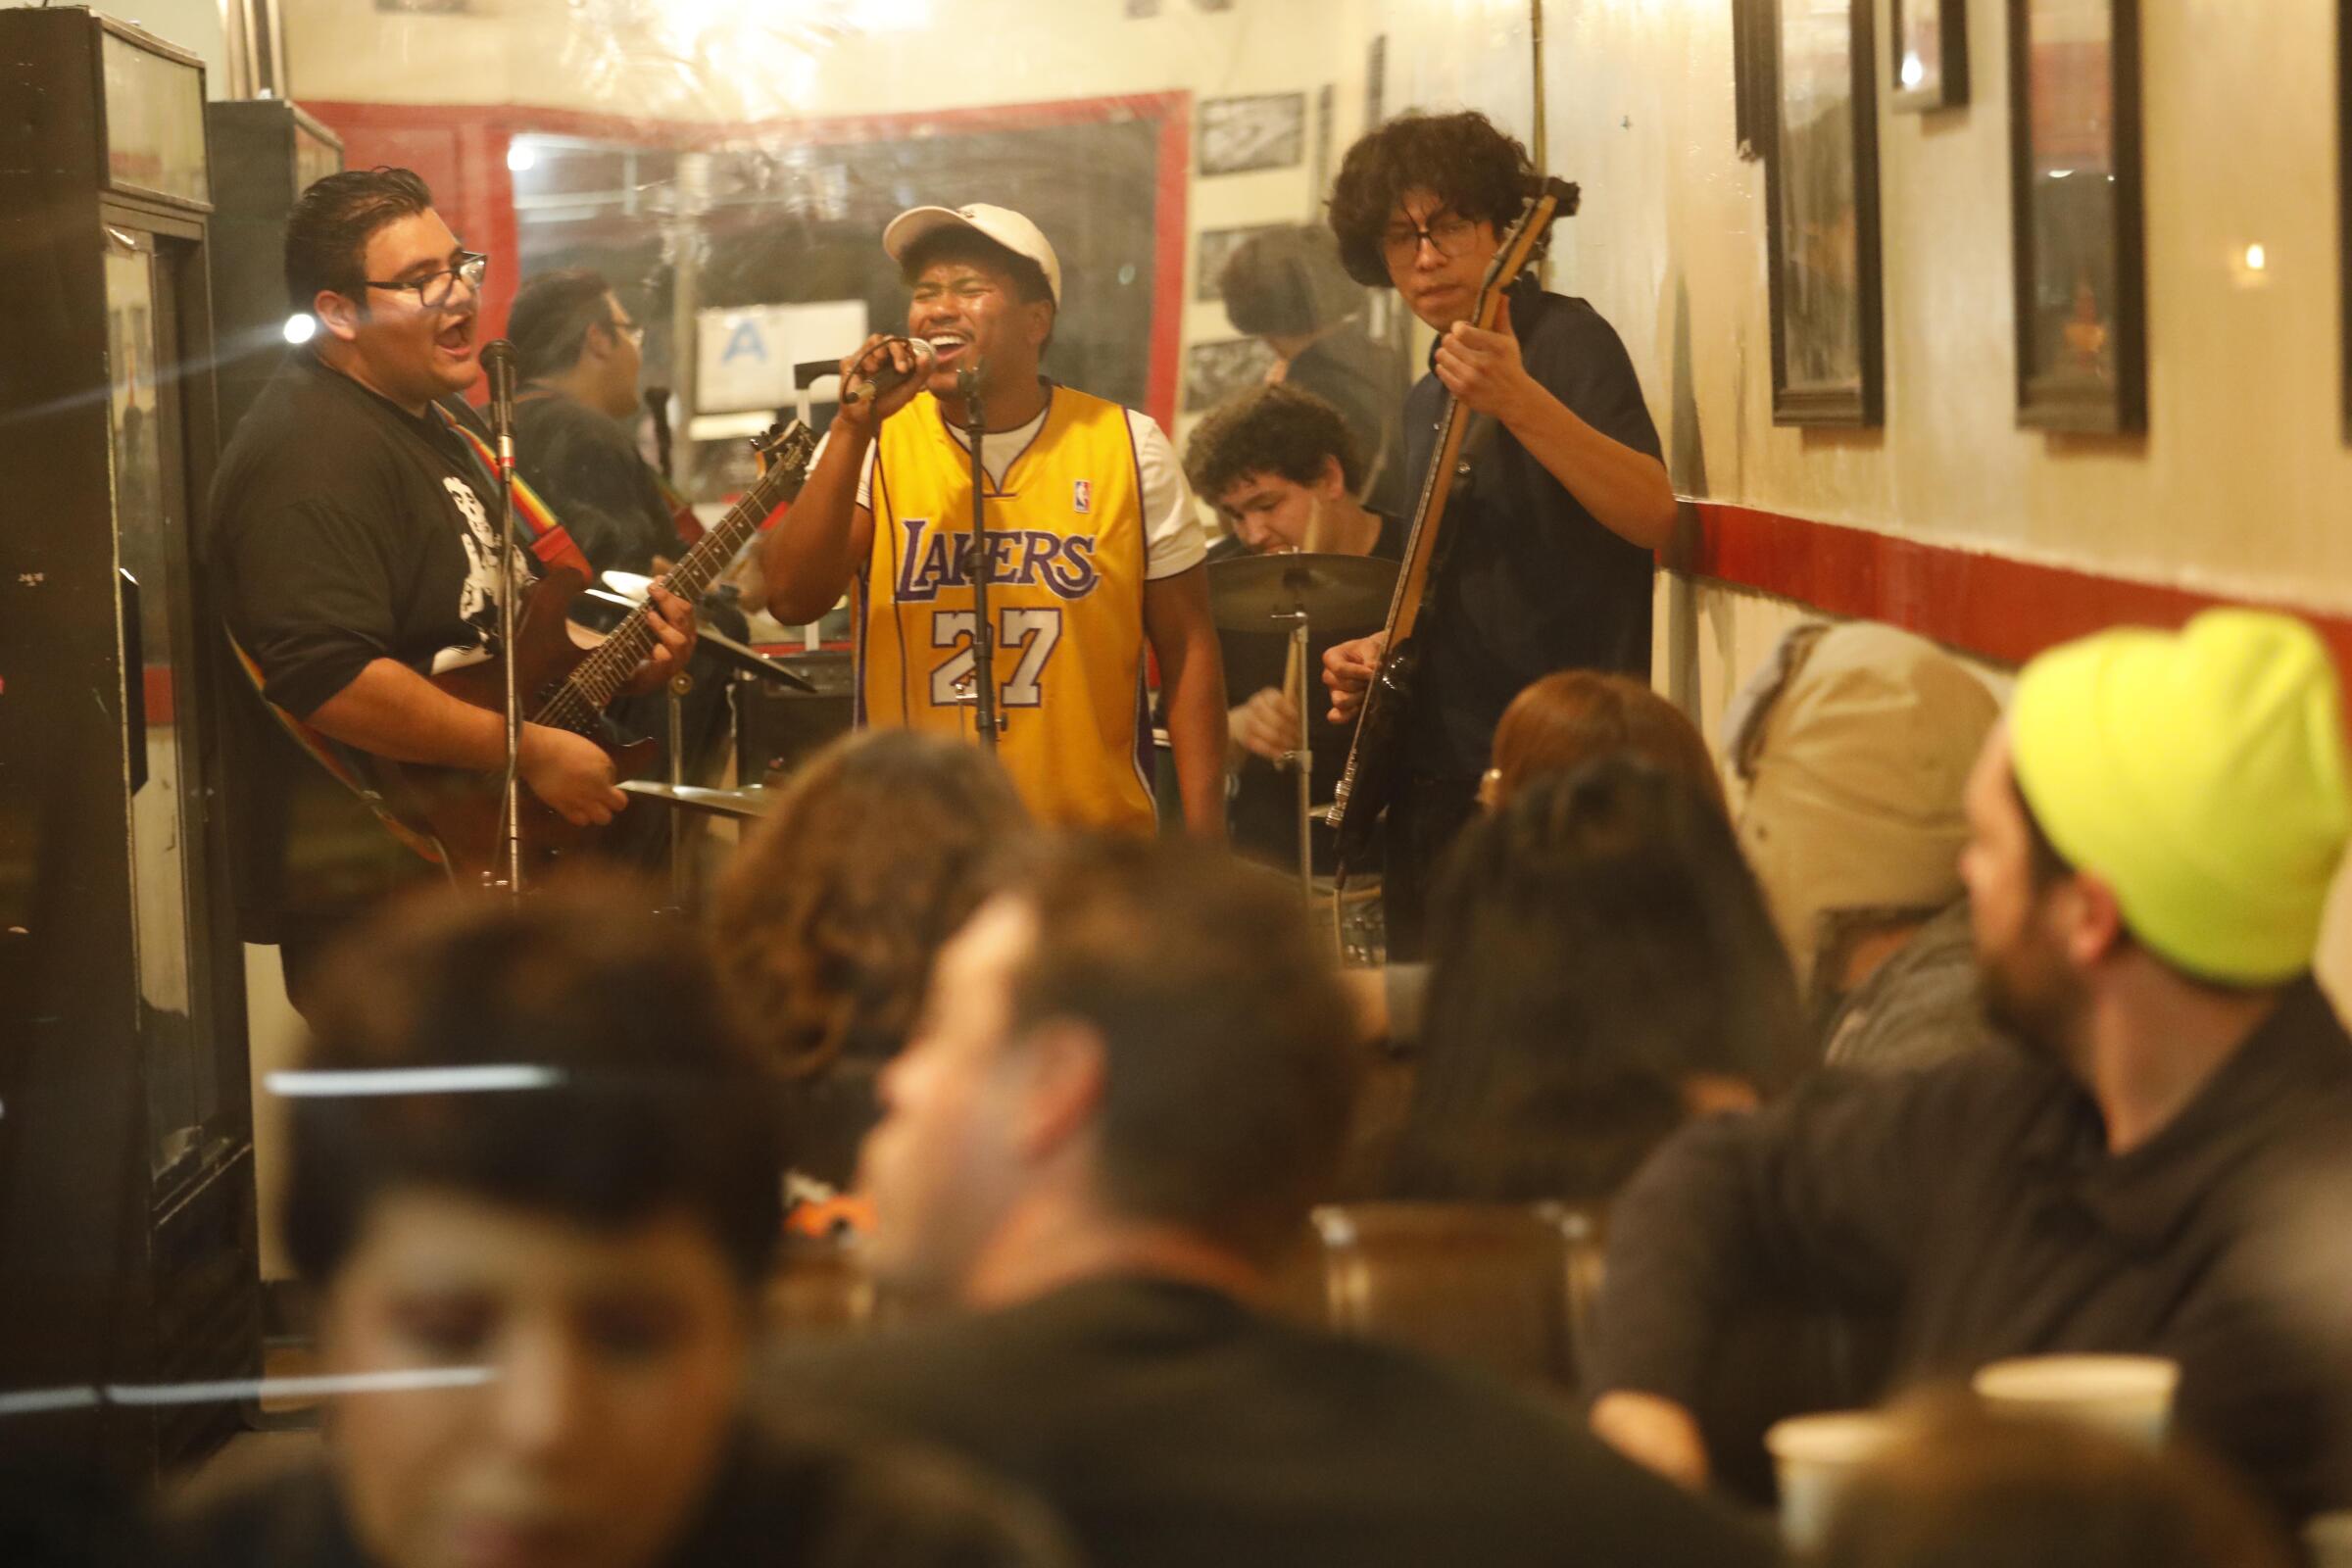 No Refunds performs at Alexander's Hub Burritos in Compton